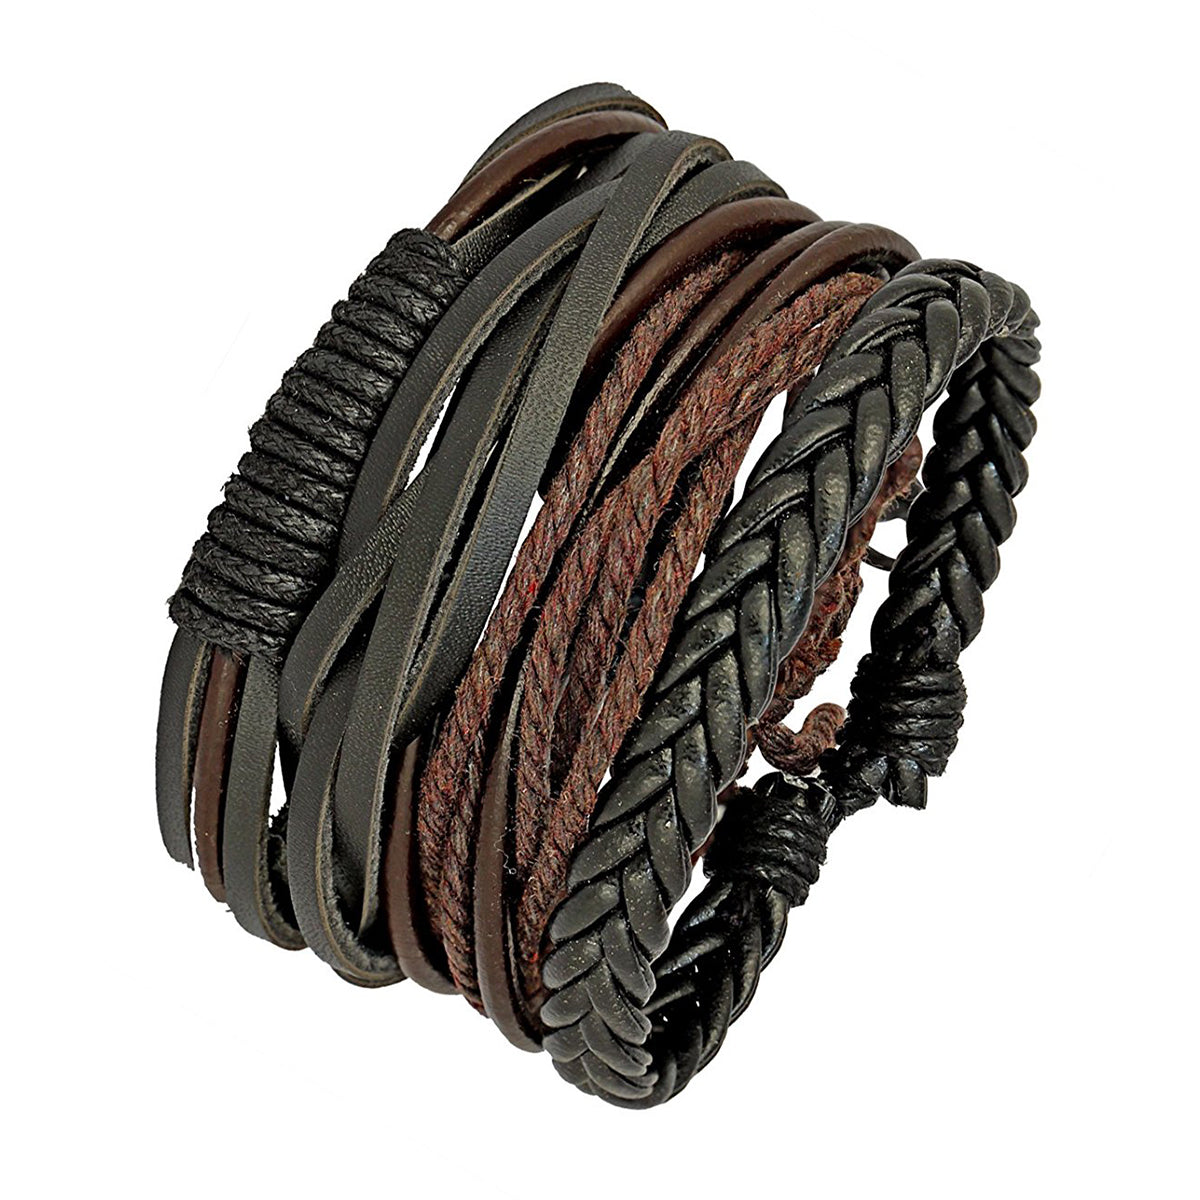 Buy Leather Bracelets Designs Online in India  Candere by Kalyan Jewellers